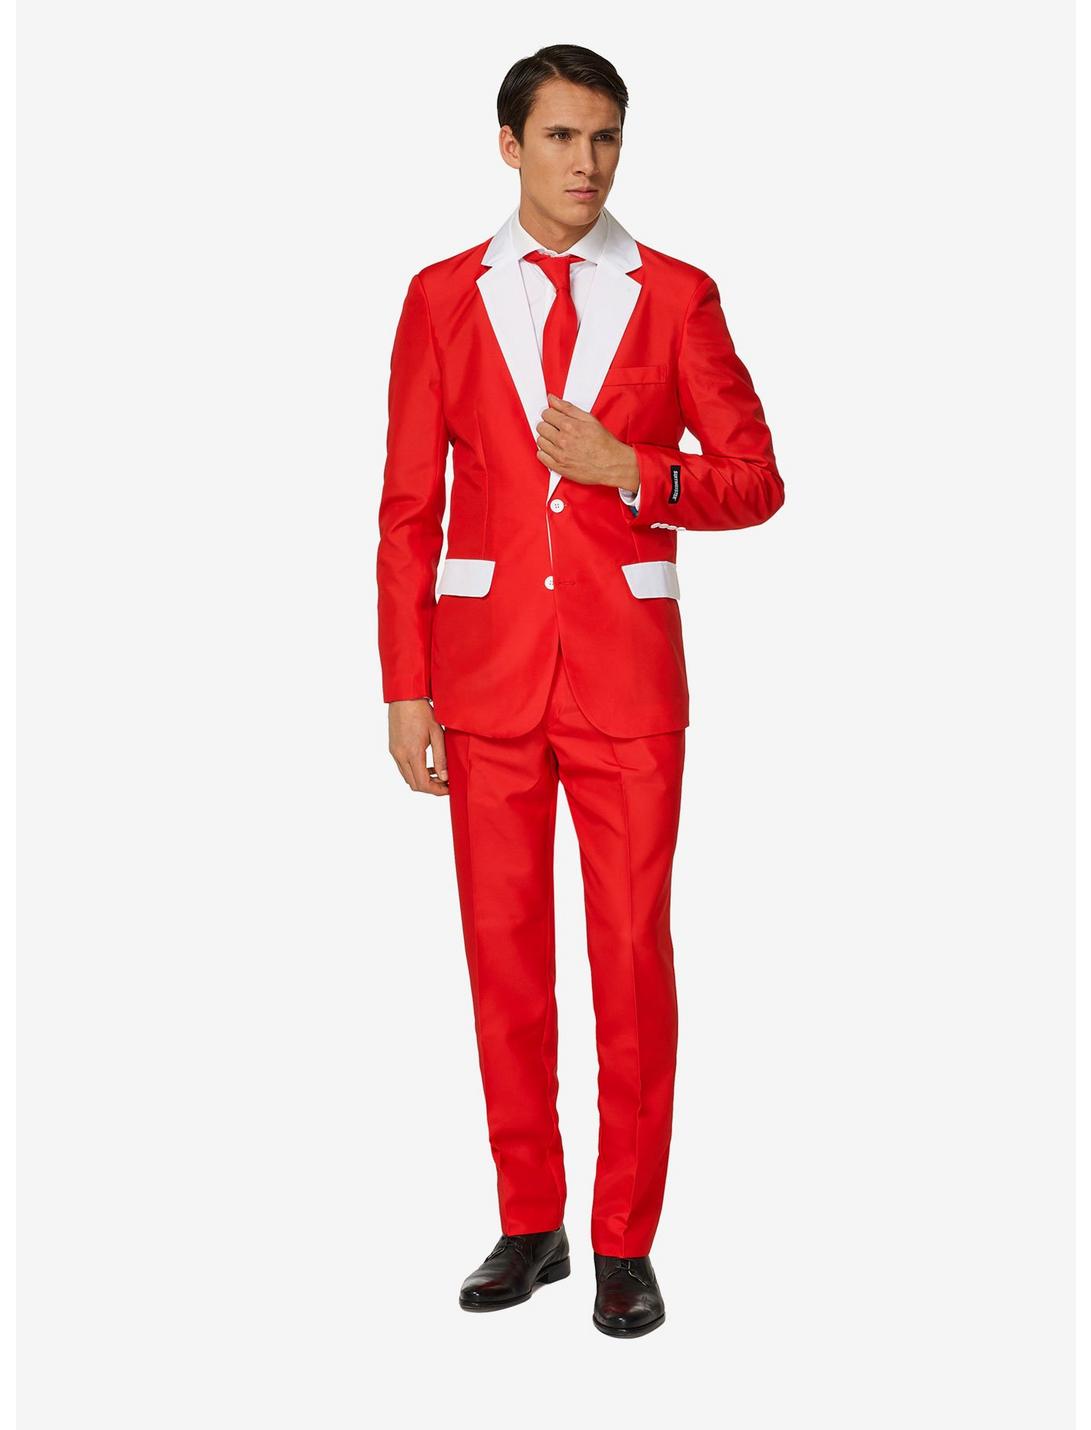 Suitmeister Men's Santa Outfit Christmas Suit, RED  WHITE, hi-res